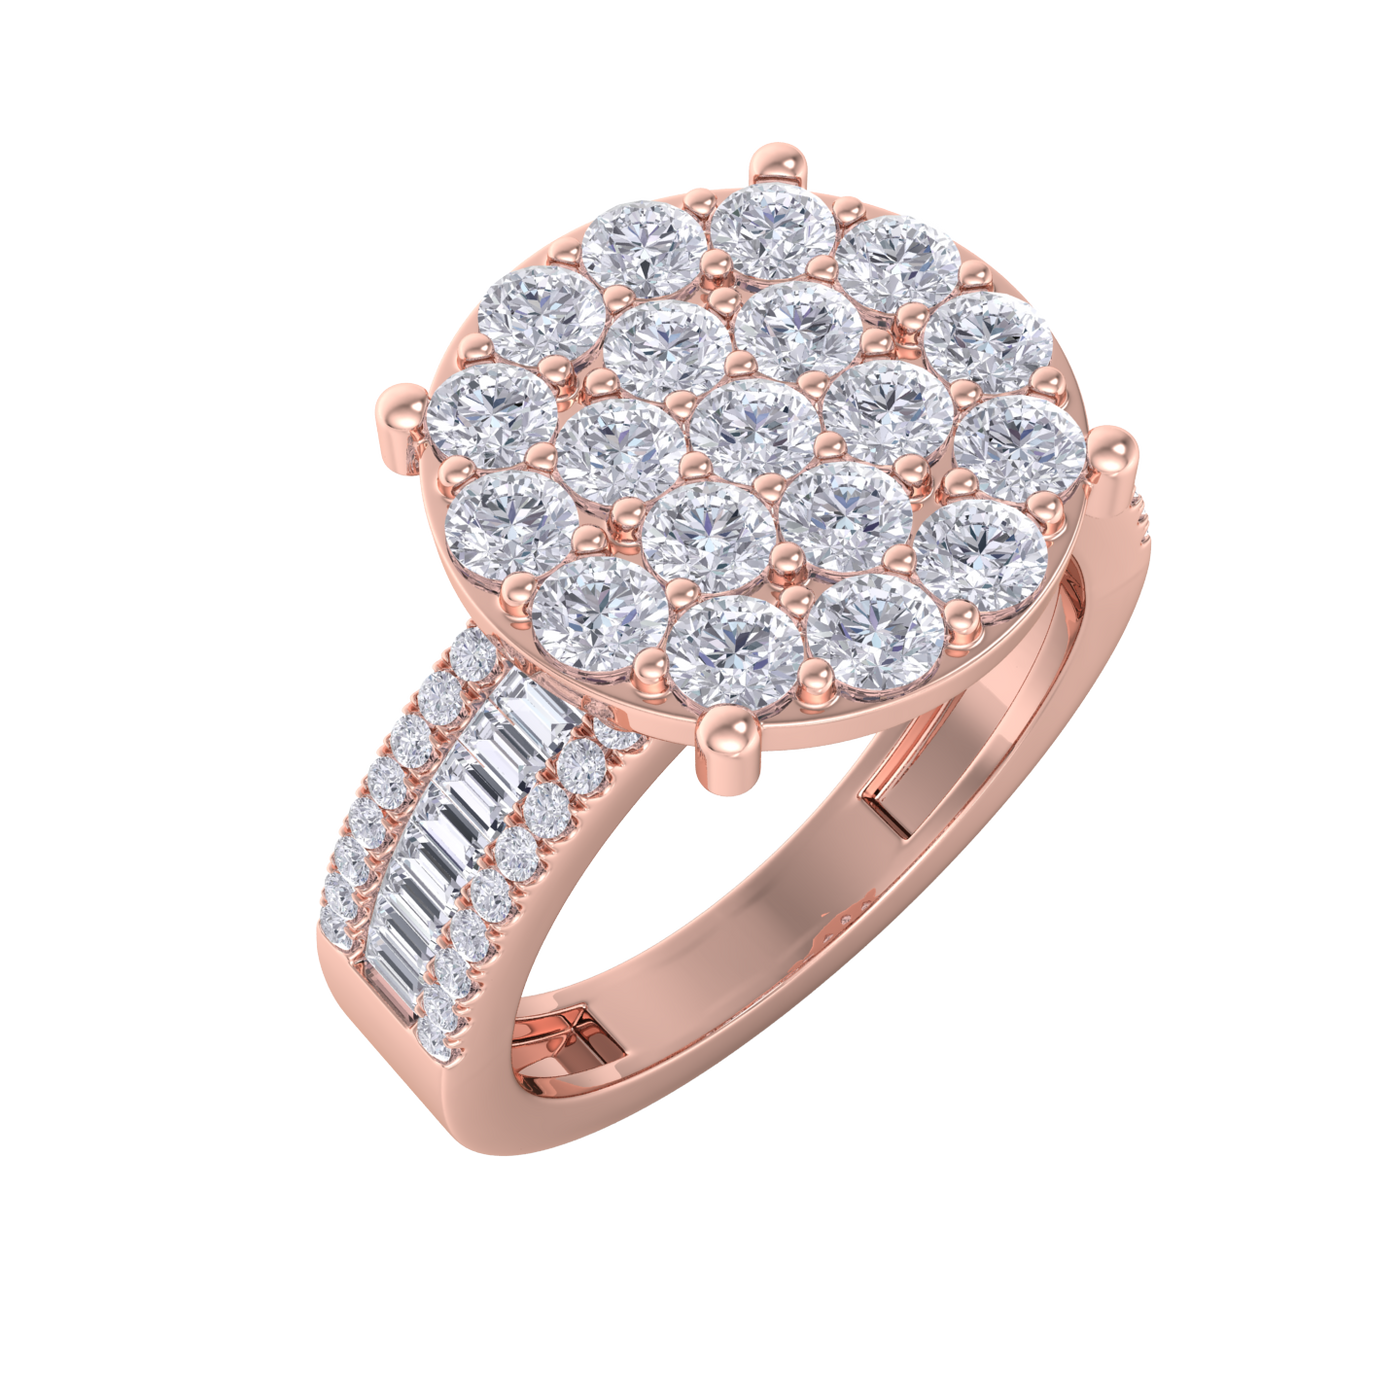 Diamond ring in white gold with white diamonds of 1.59 ct in weight